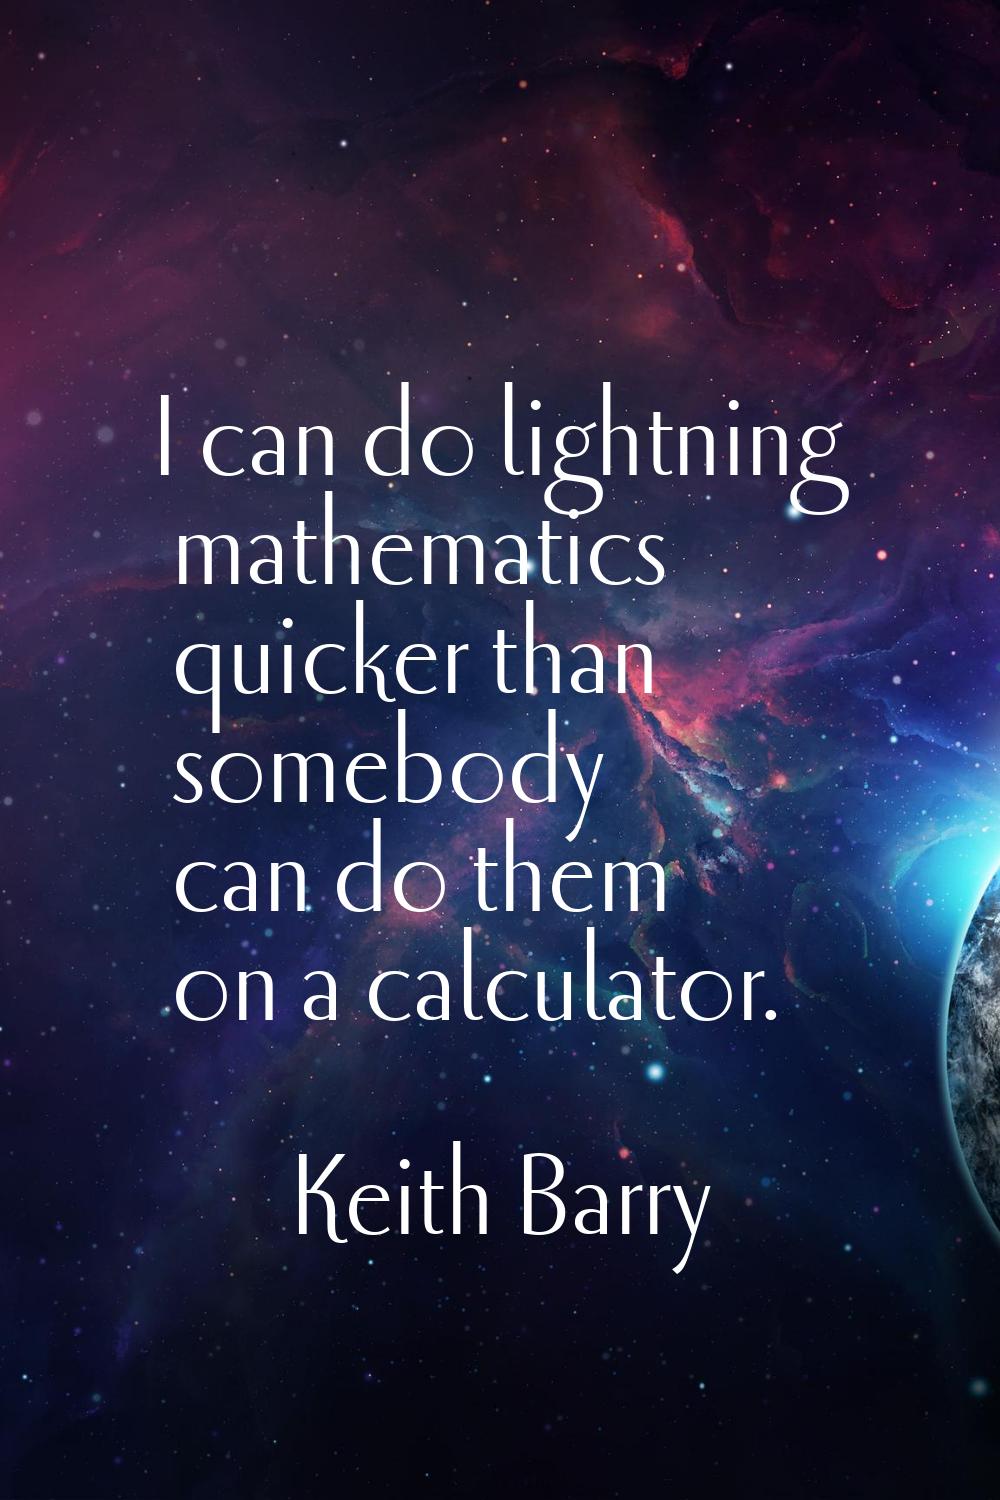 I can do lightning mathematics quicker than somebody can do them on a calculator.